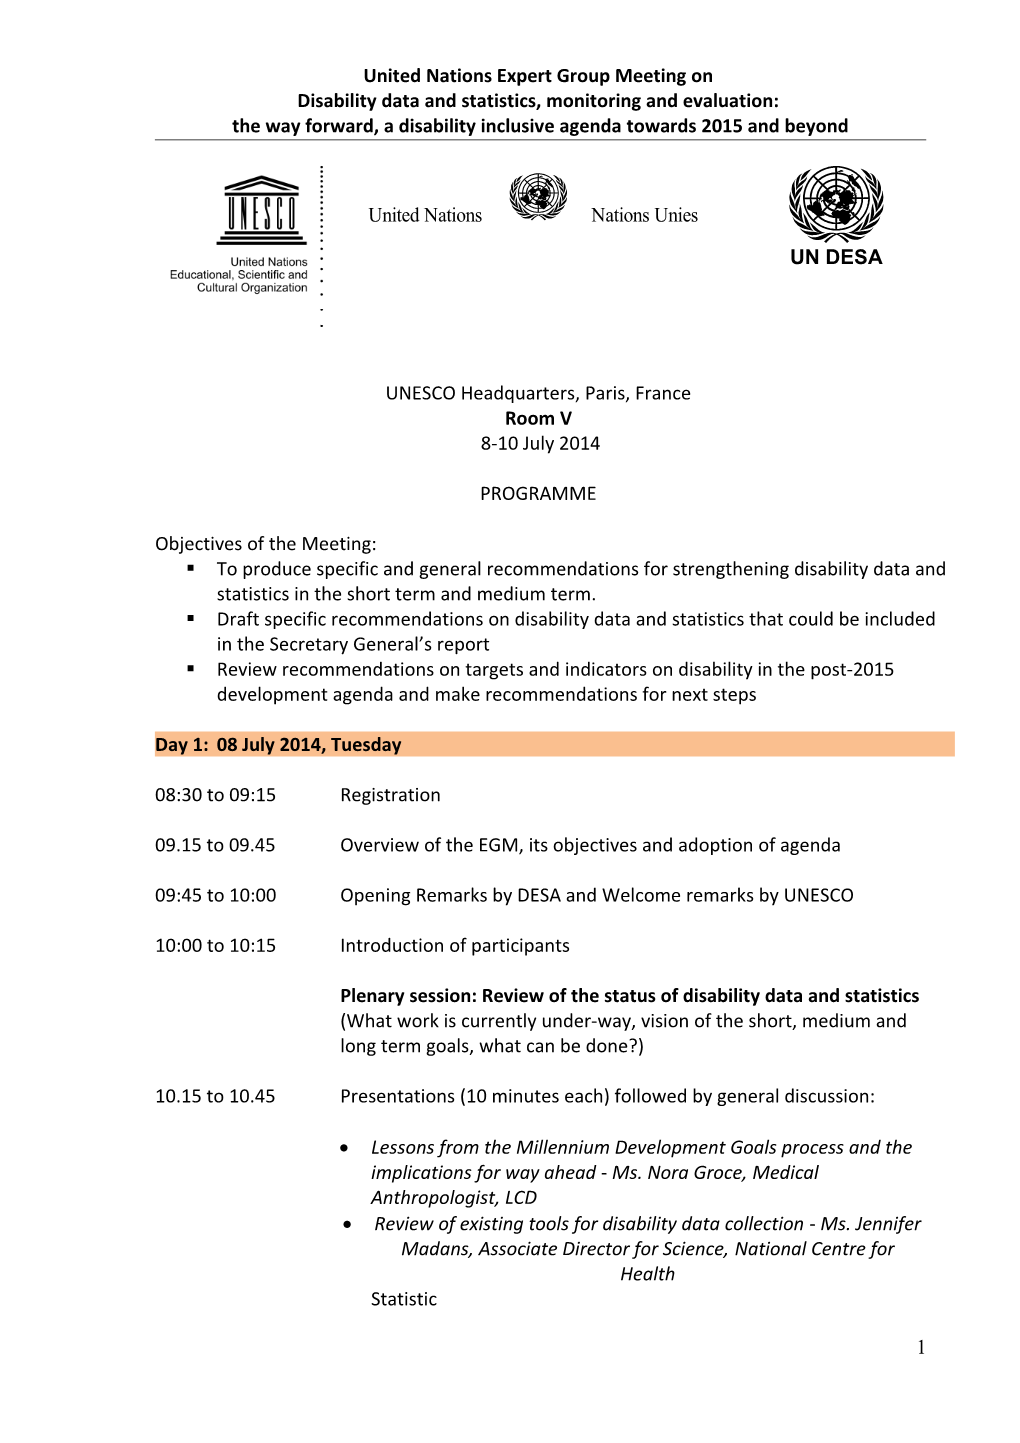 United Nations Expert Group Meeting on Disability Data and Statistics, Monitoring And